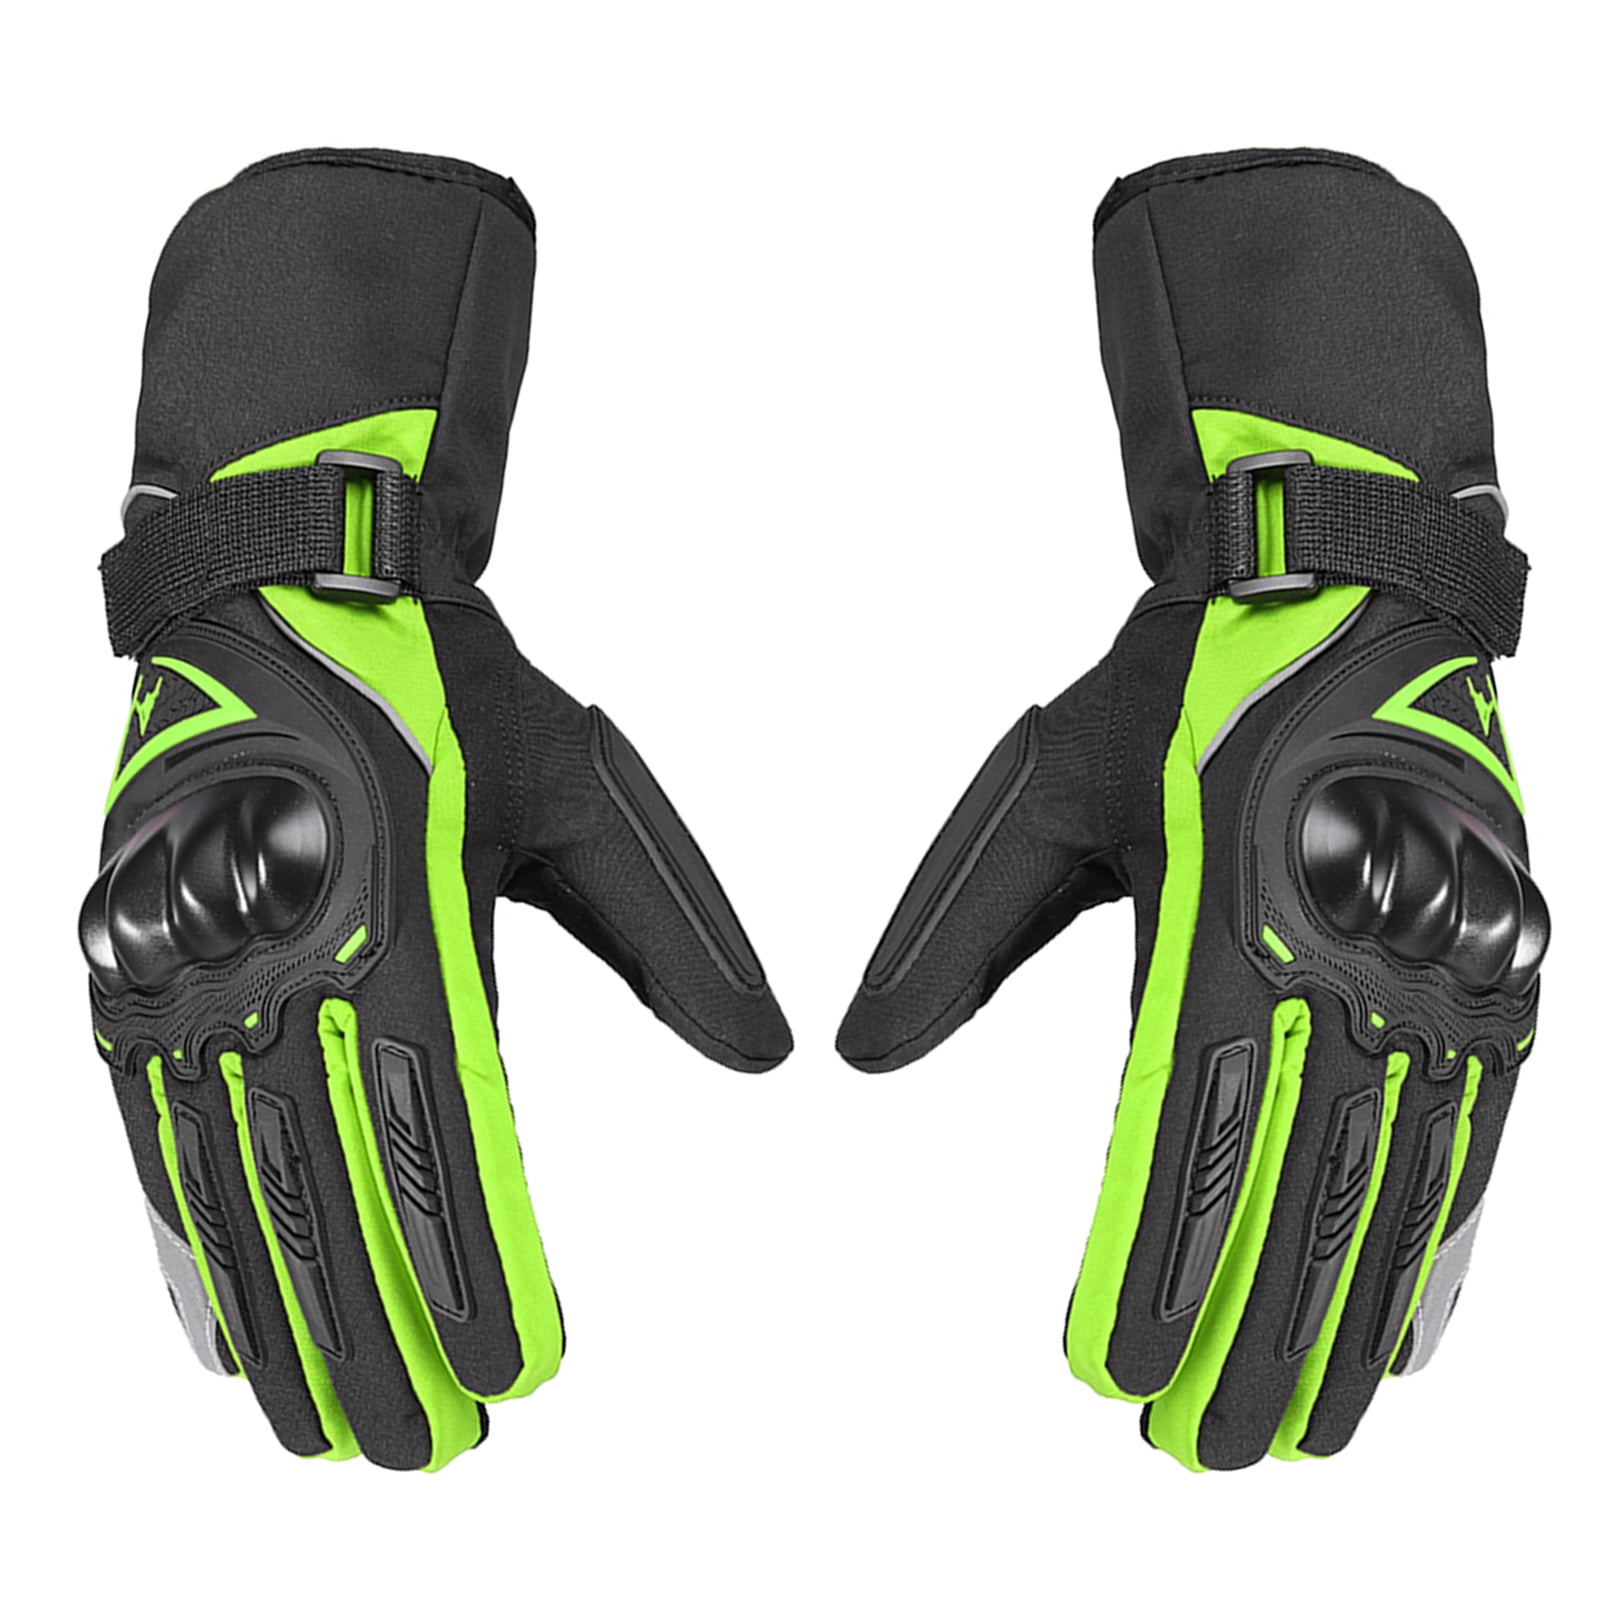 Tomshoo Waterproof Cold Weather Motorcycle Gloves Keep Hands Dry and Warm  in Winter! 